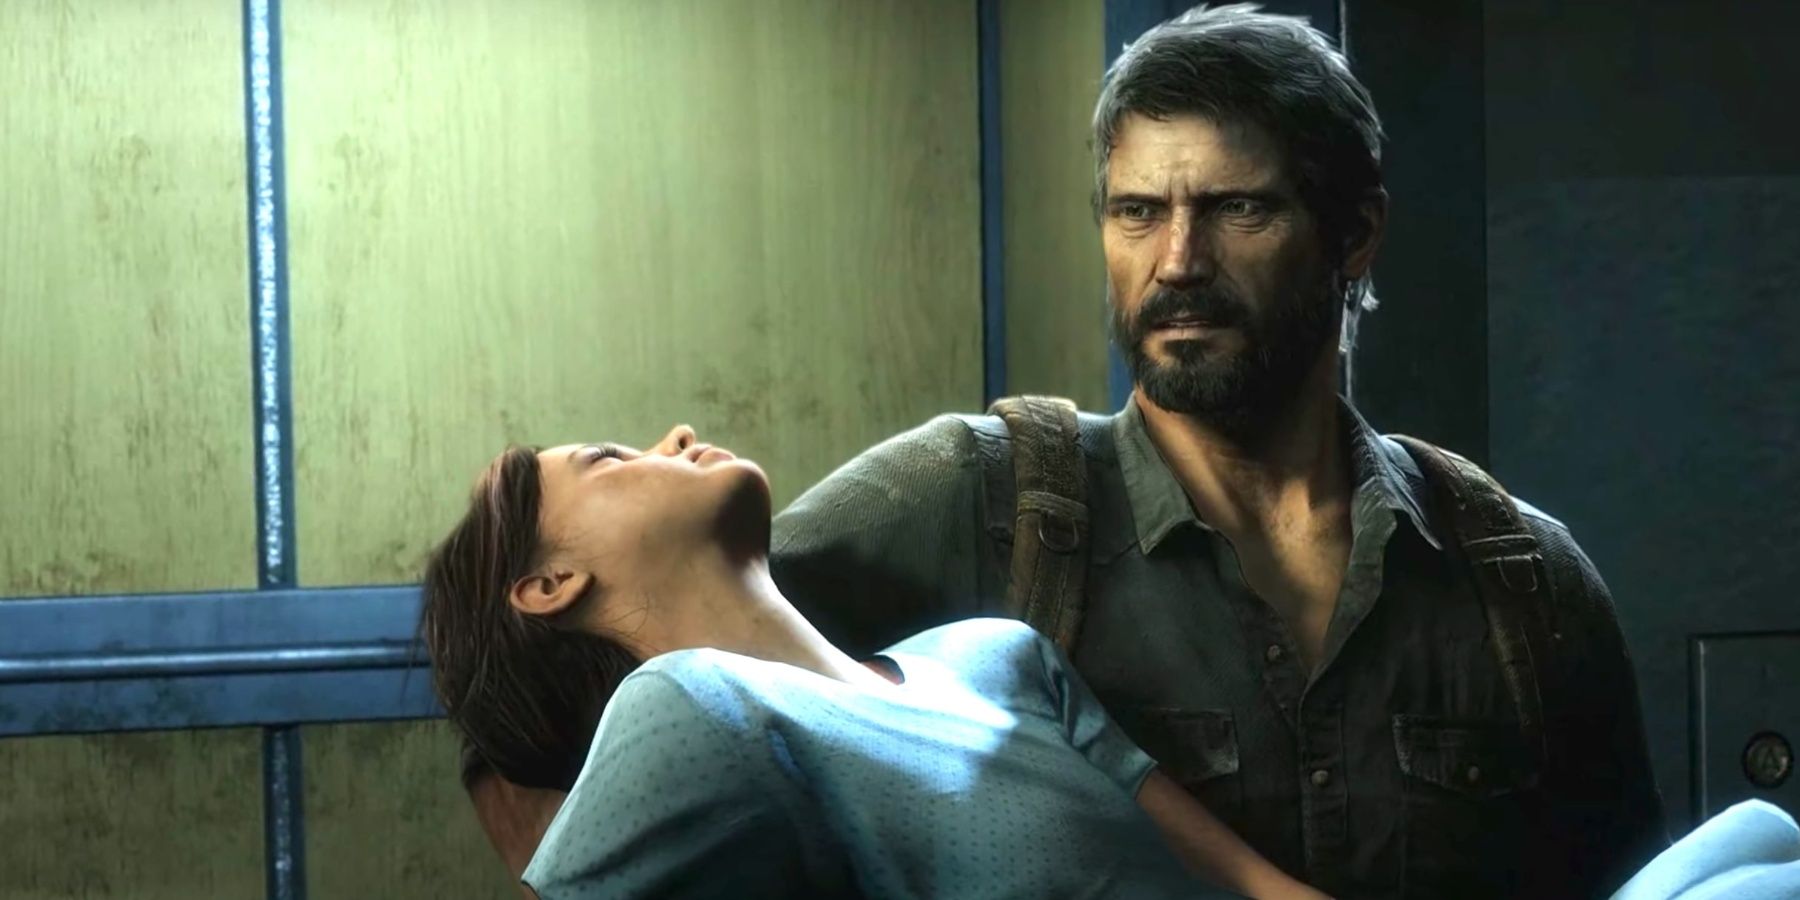 Joel from The Last Of Us carrying Ellie, a young girl in a hospital gown